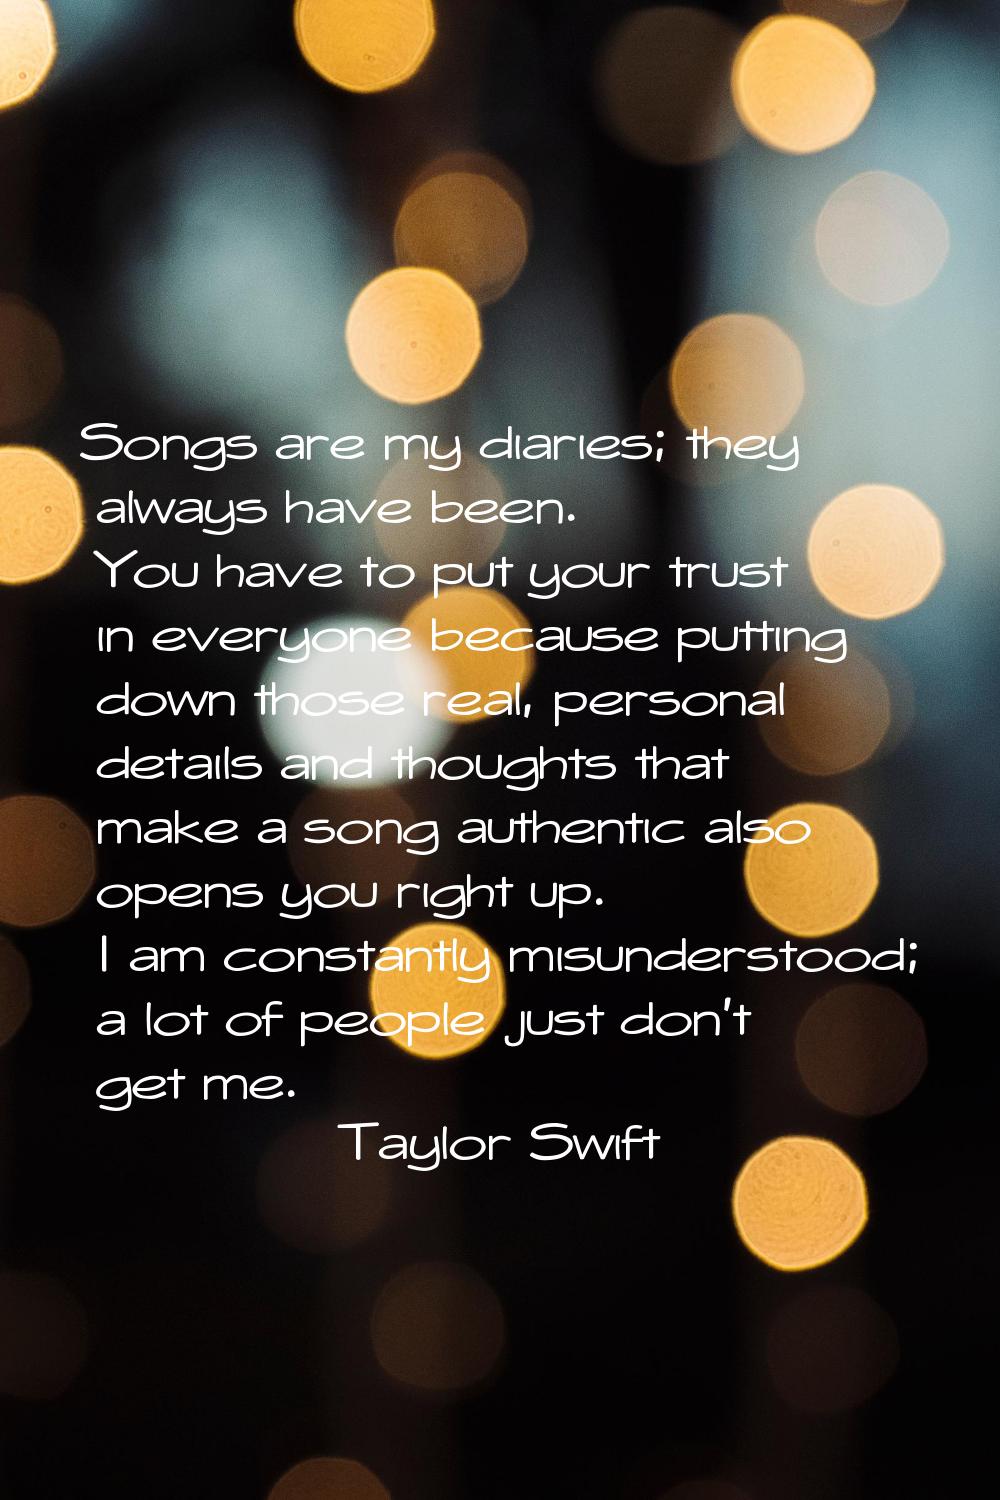 Songs are my diaries; they always have been. You have to put your trust in everyone because putting